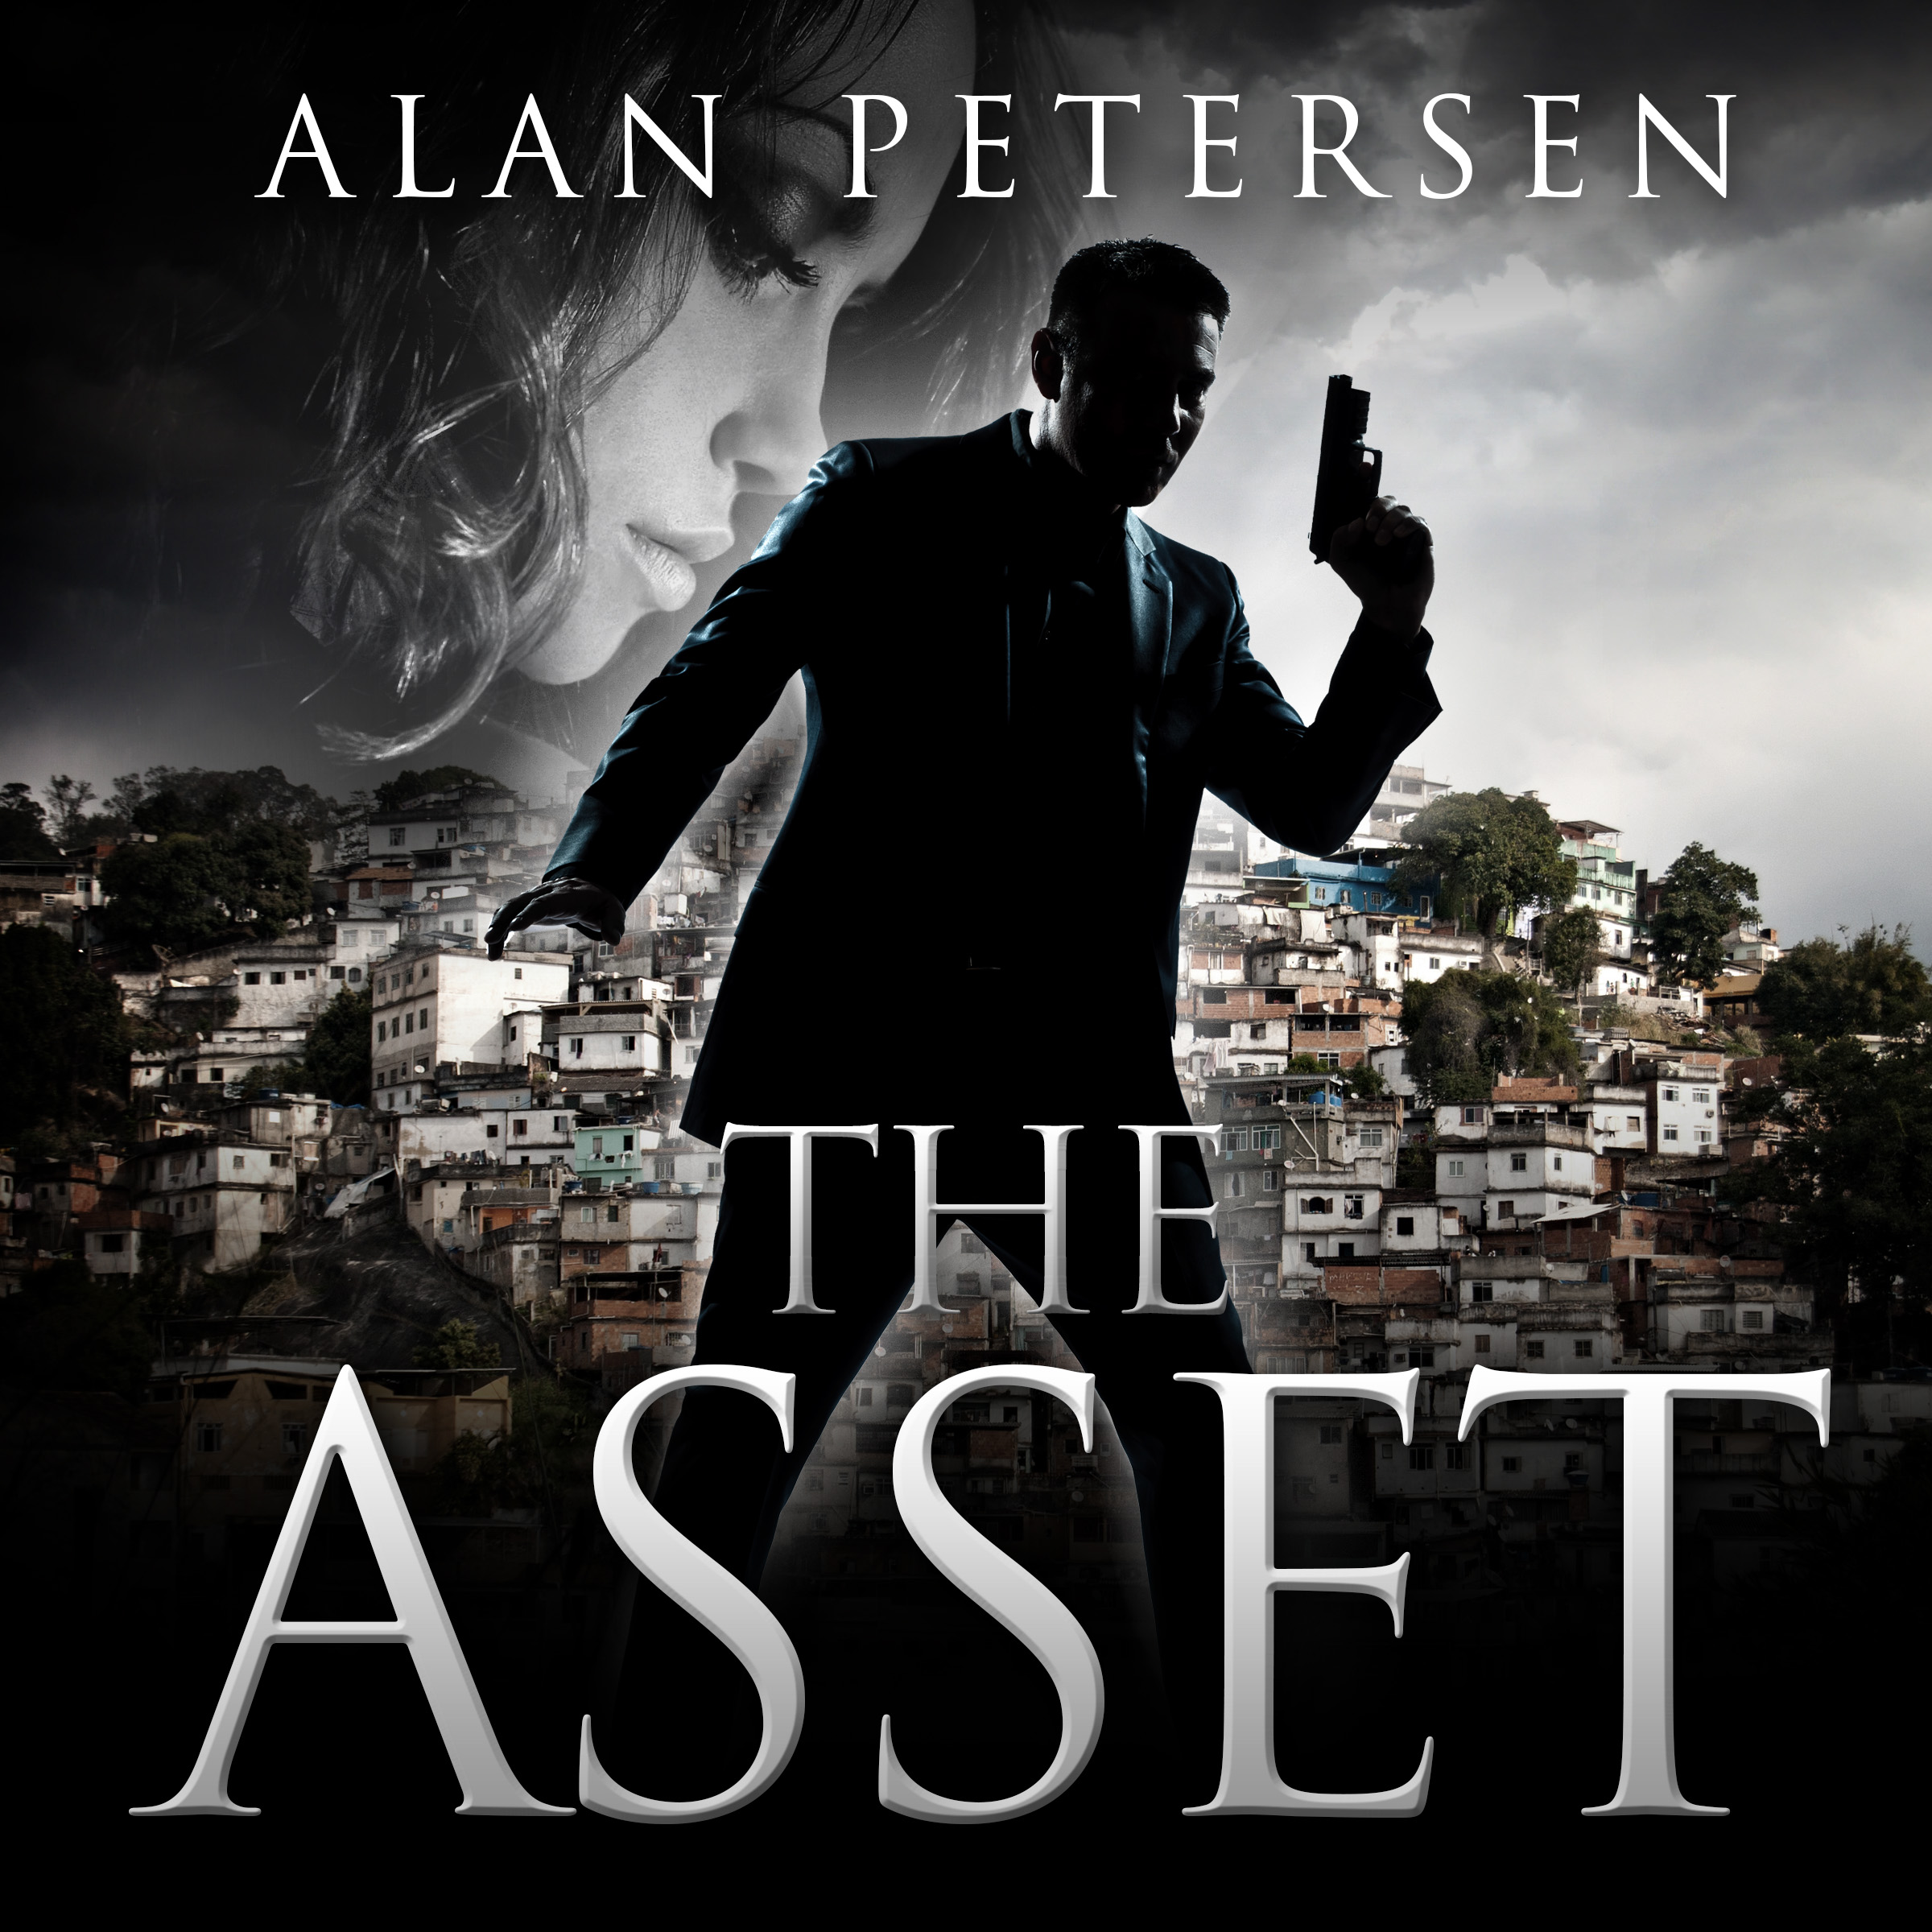 ACX Audible Book Cover for The Asset